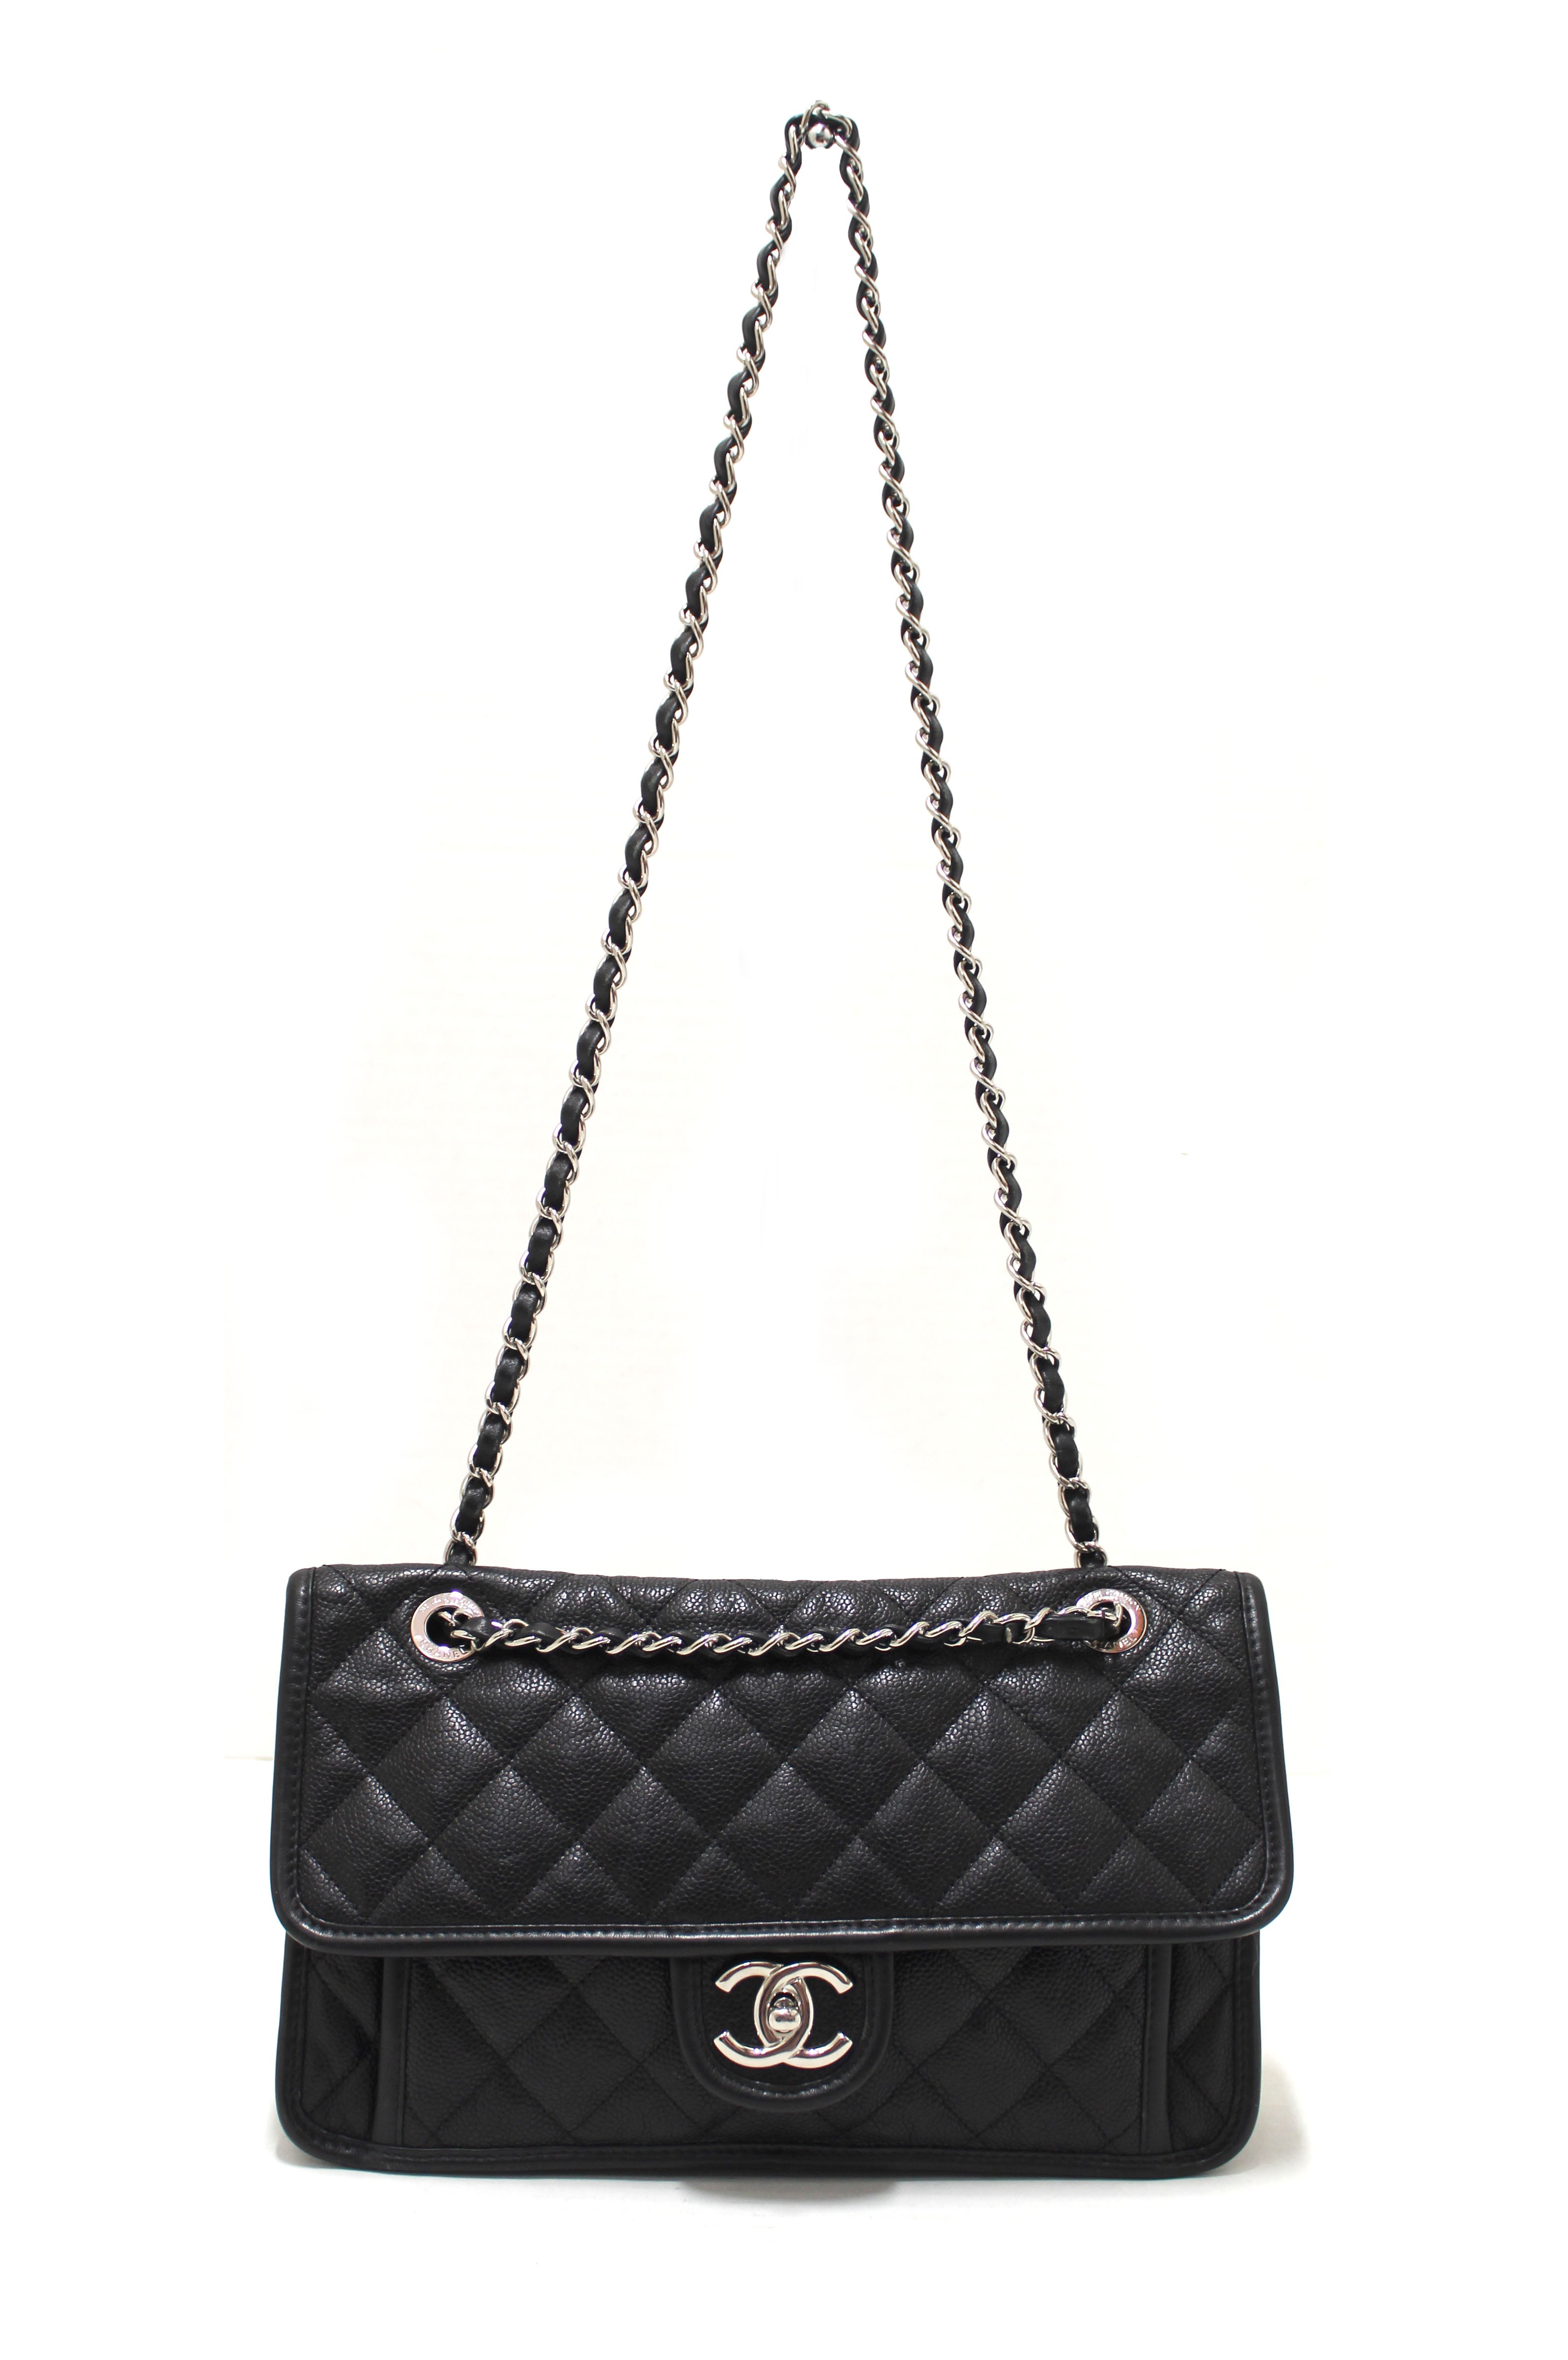 Chanel Dark White Quilted Caviar Leather French Riviera Medium